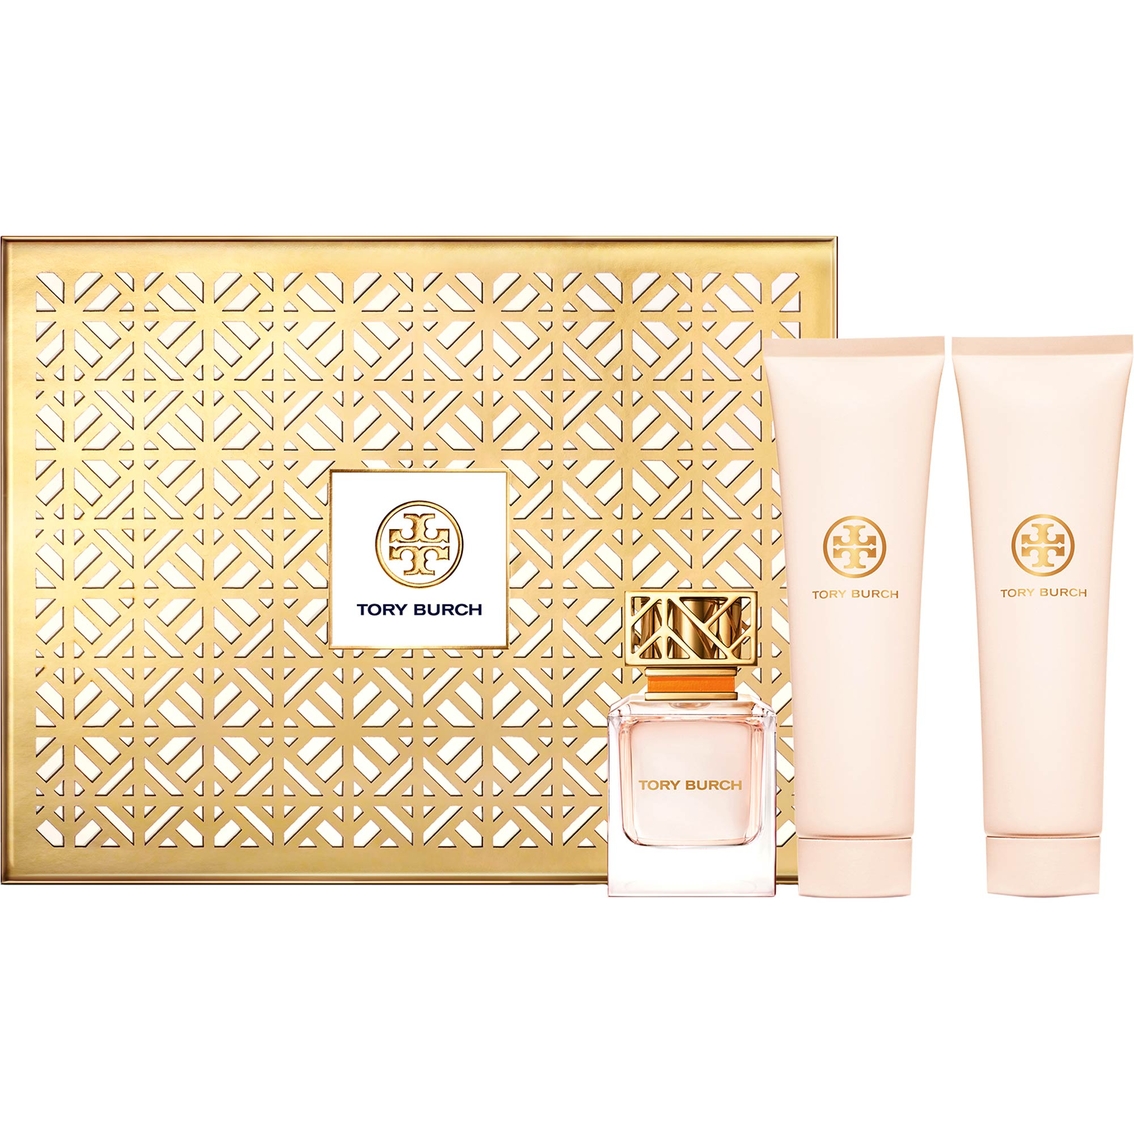 Tory Burch Signature 3 Pc. Gift Set | Gifts Sets For Her | Beauty & Health  | Shop The Exchange